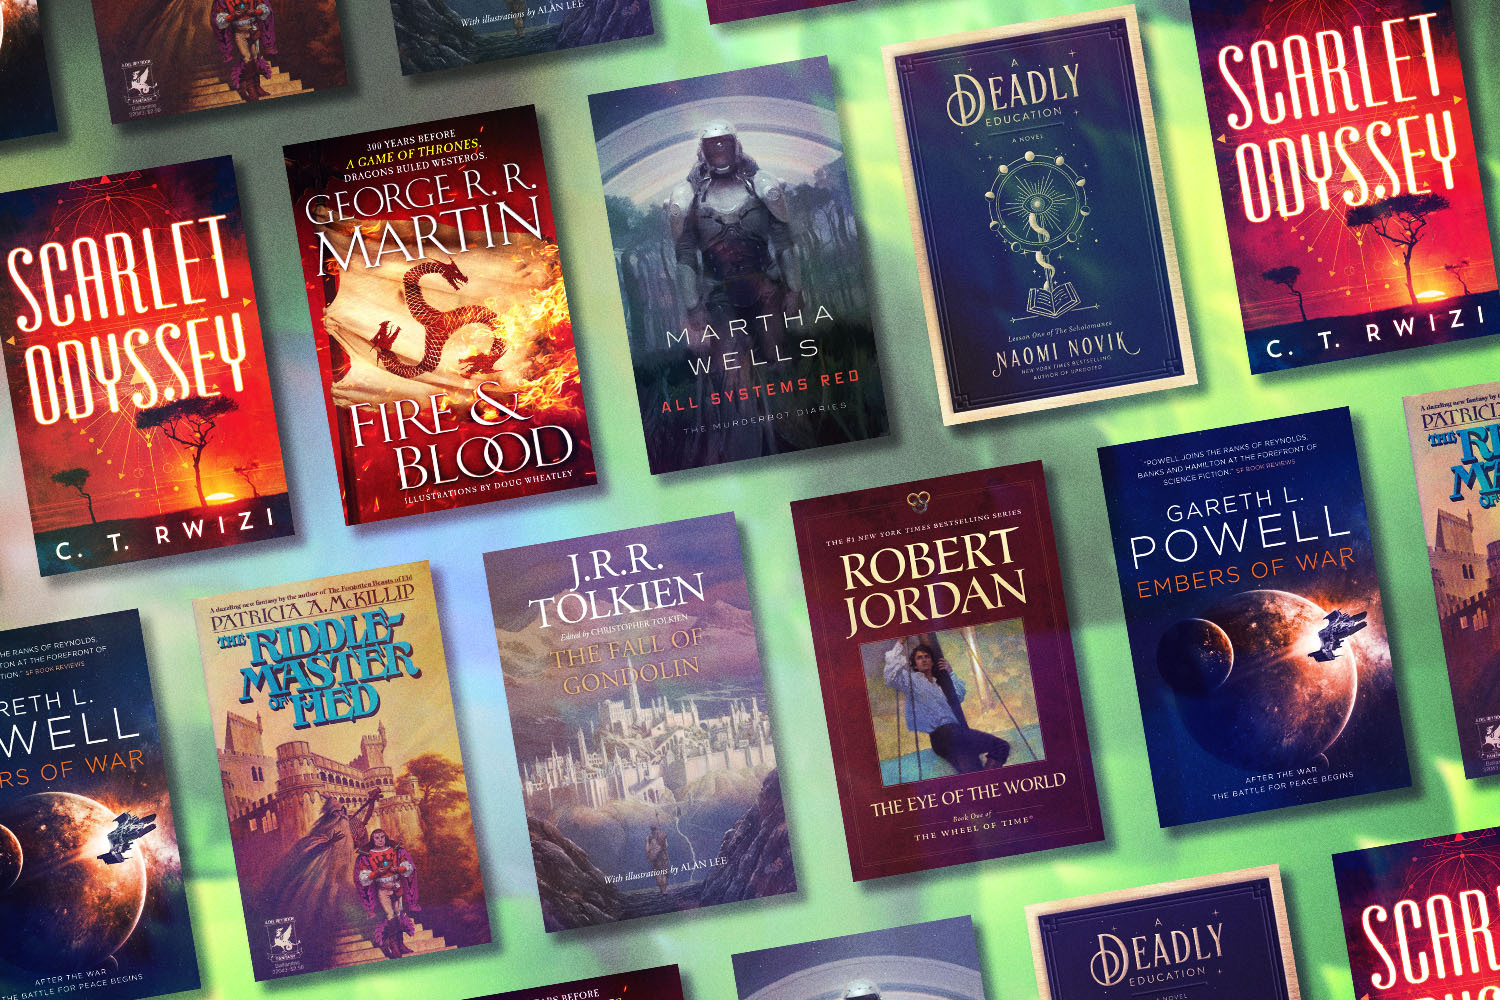 The 50 best science fiction and fantasy books of the past decade : NPR